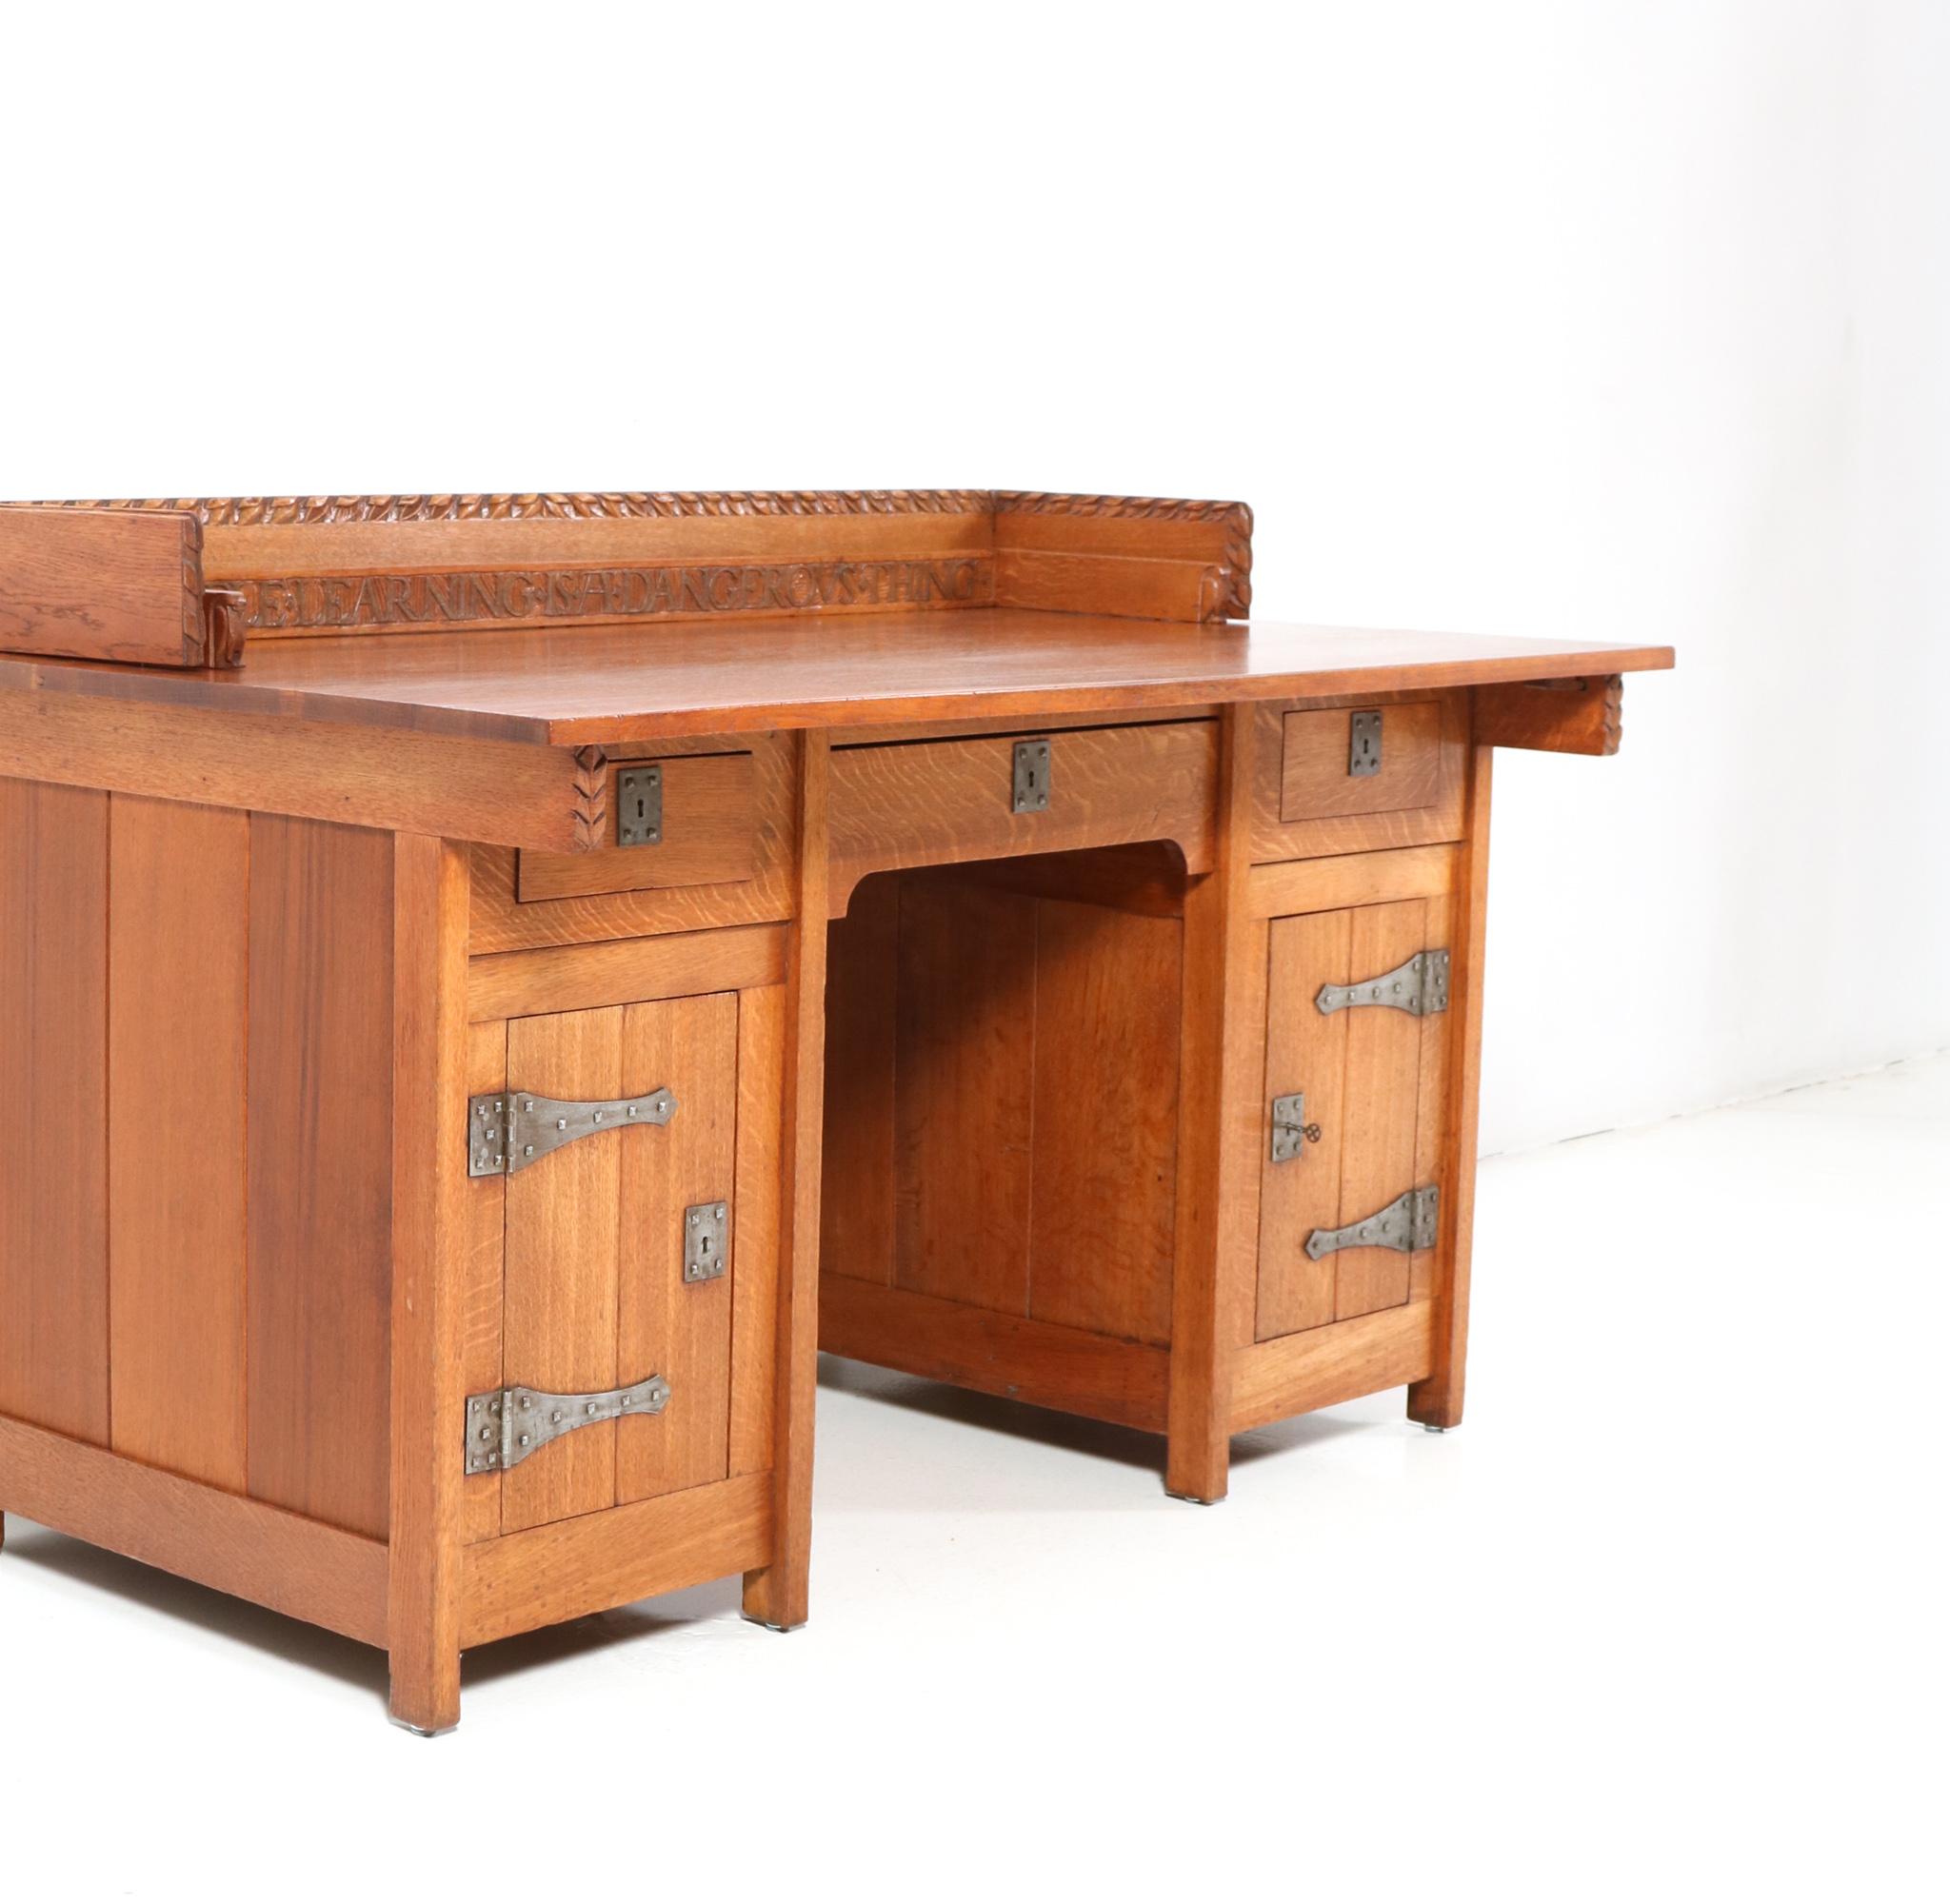 Magnificent and ultra rare Arts & Crafts pedestal desk.
Design by Alexander J. Kropholler.
Striking Dutch design from the 1890s.
Executed in solid oak and original wrought iron, this stunning and one of a kind museum piece has a hand-carved